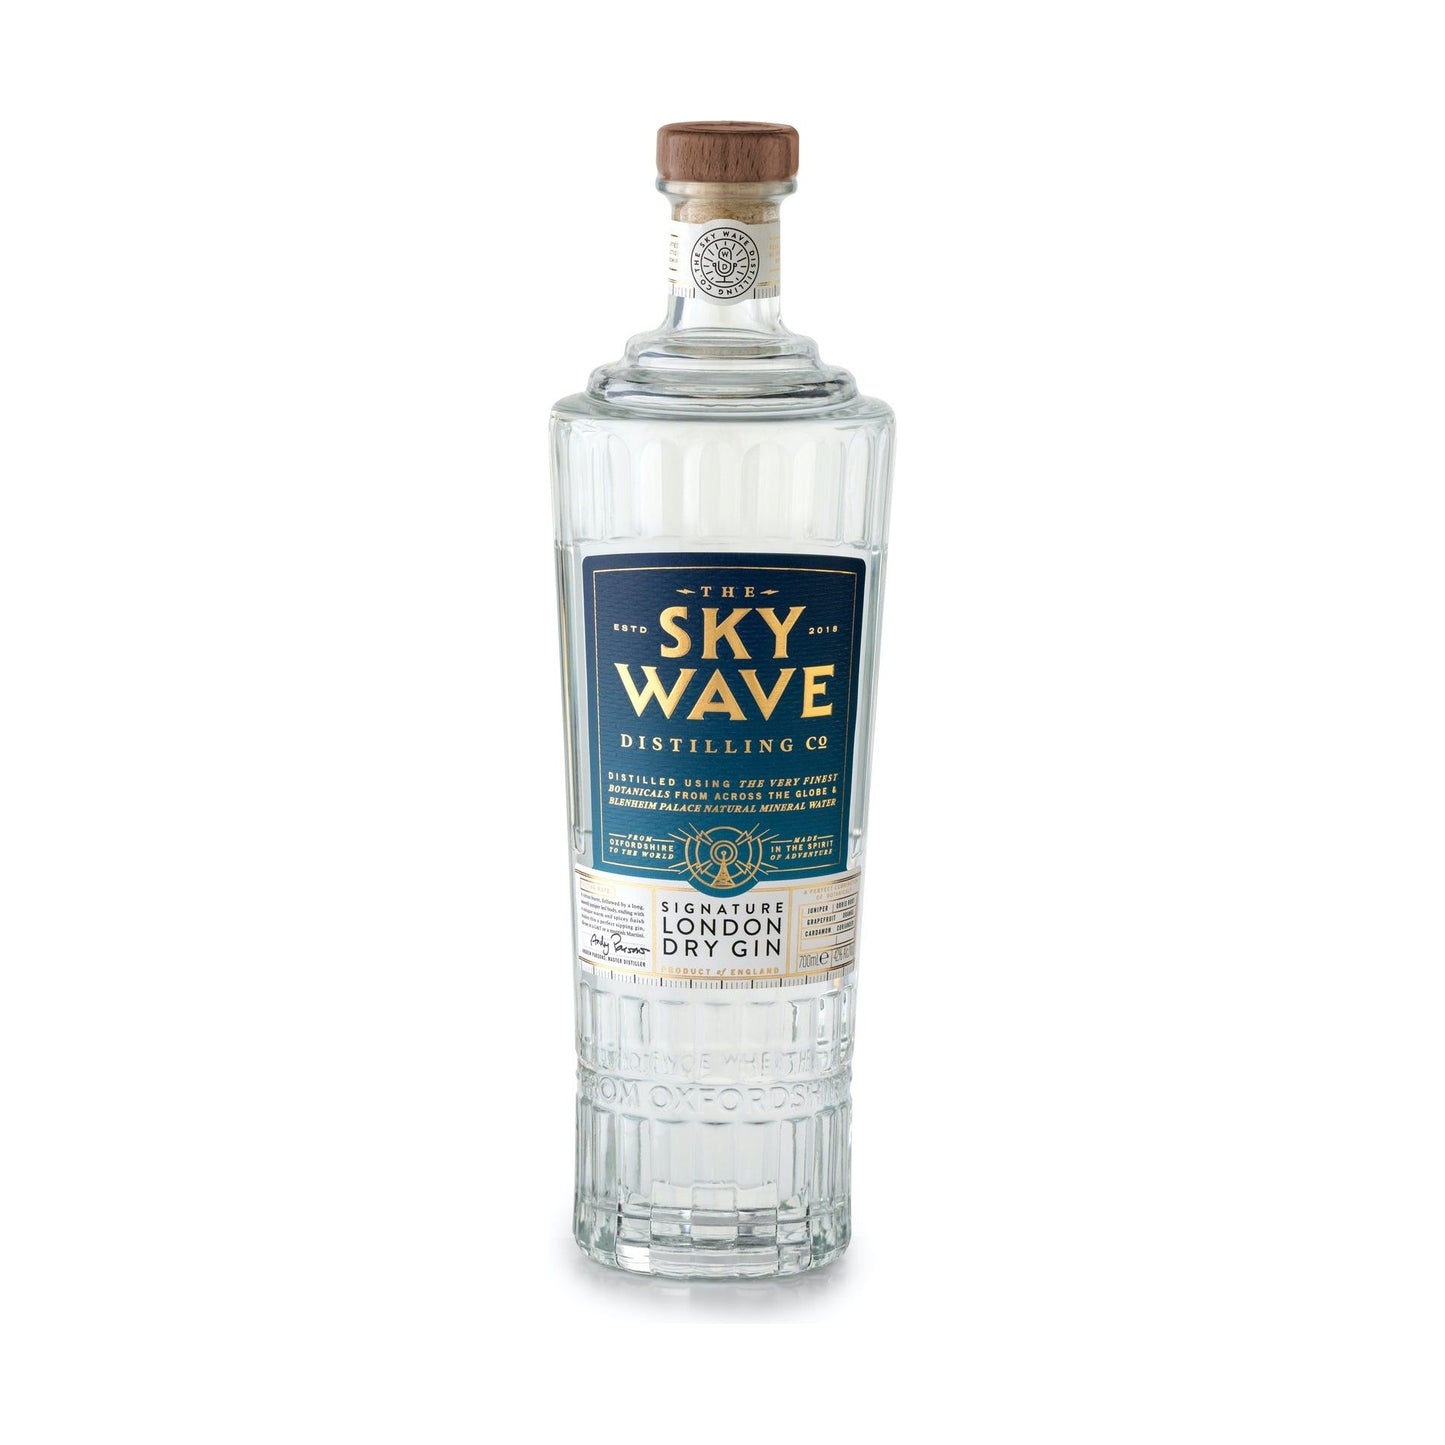 Sky Wave, Signature, London Dry Gin